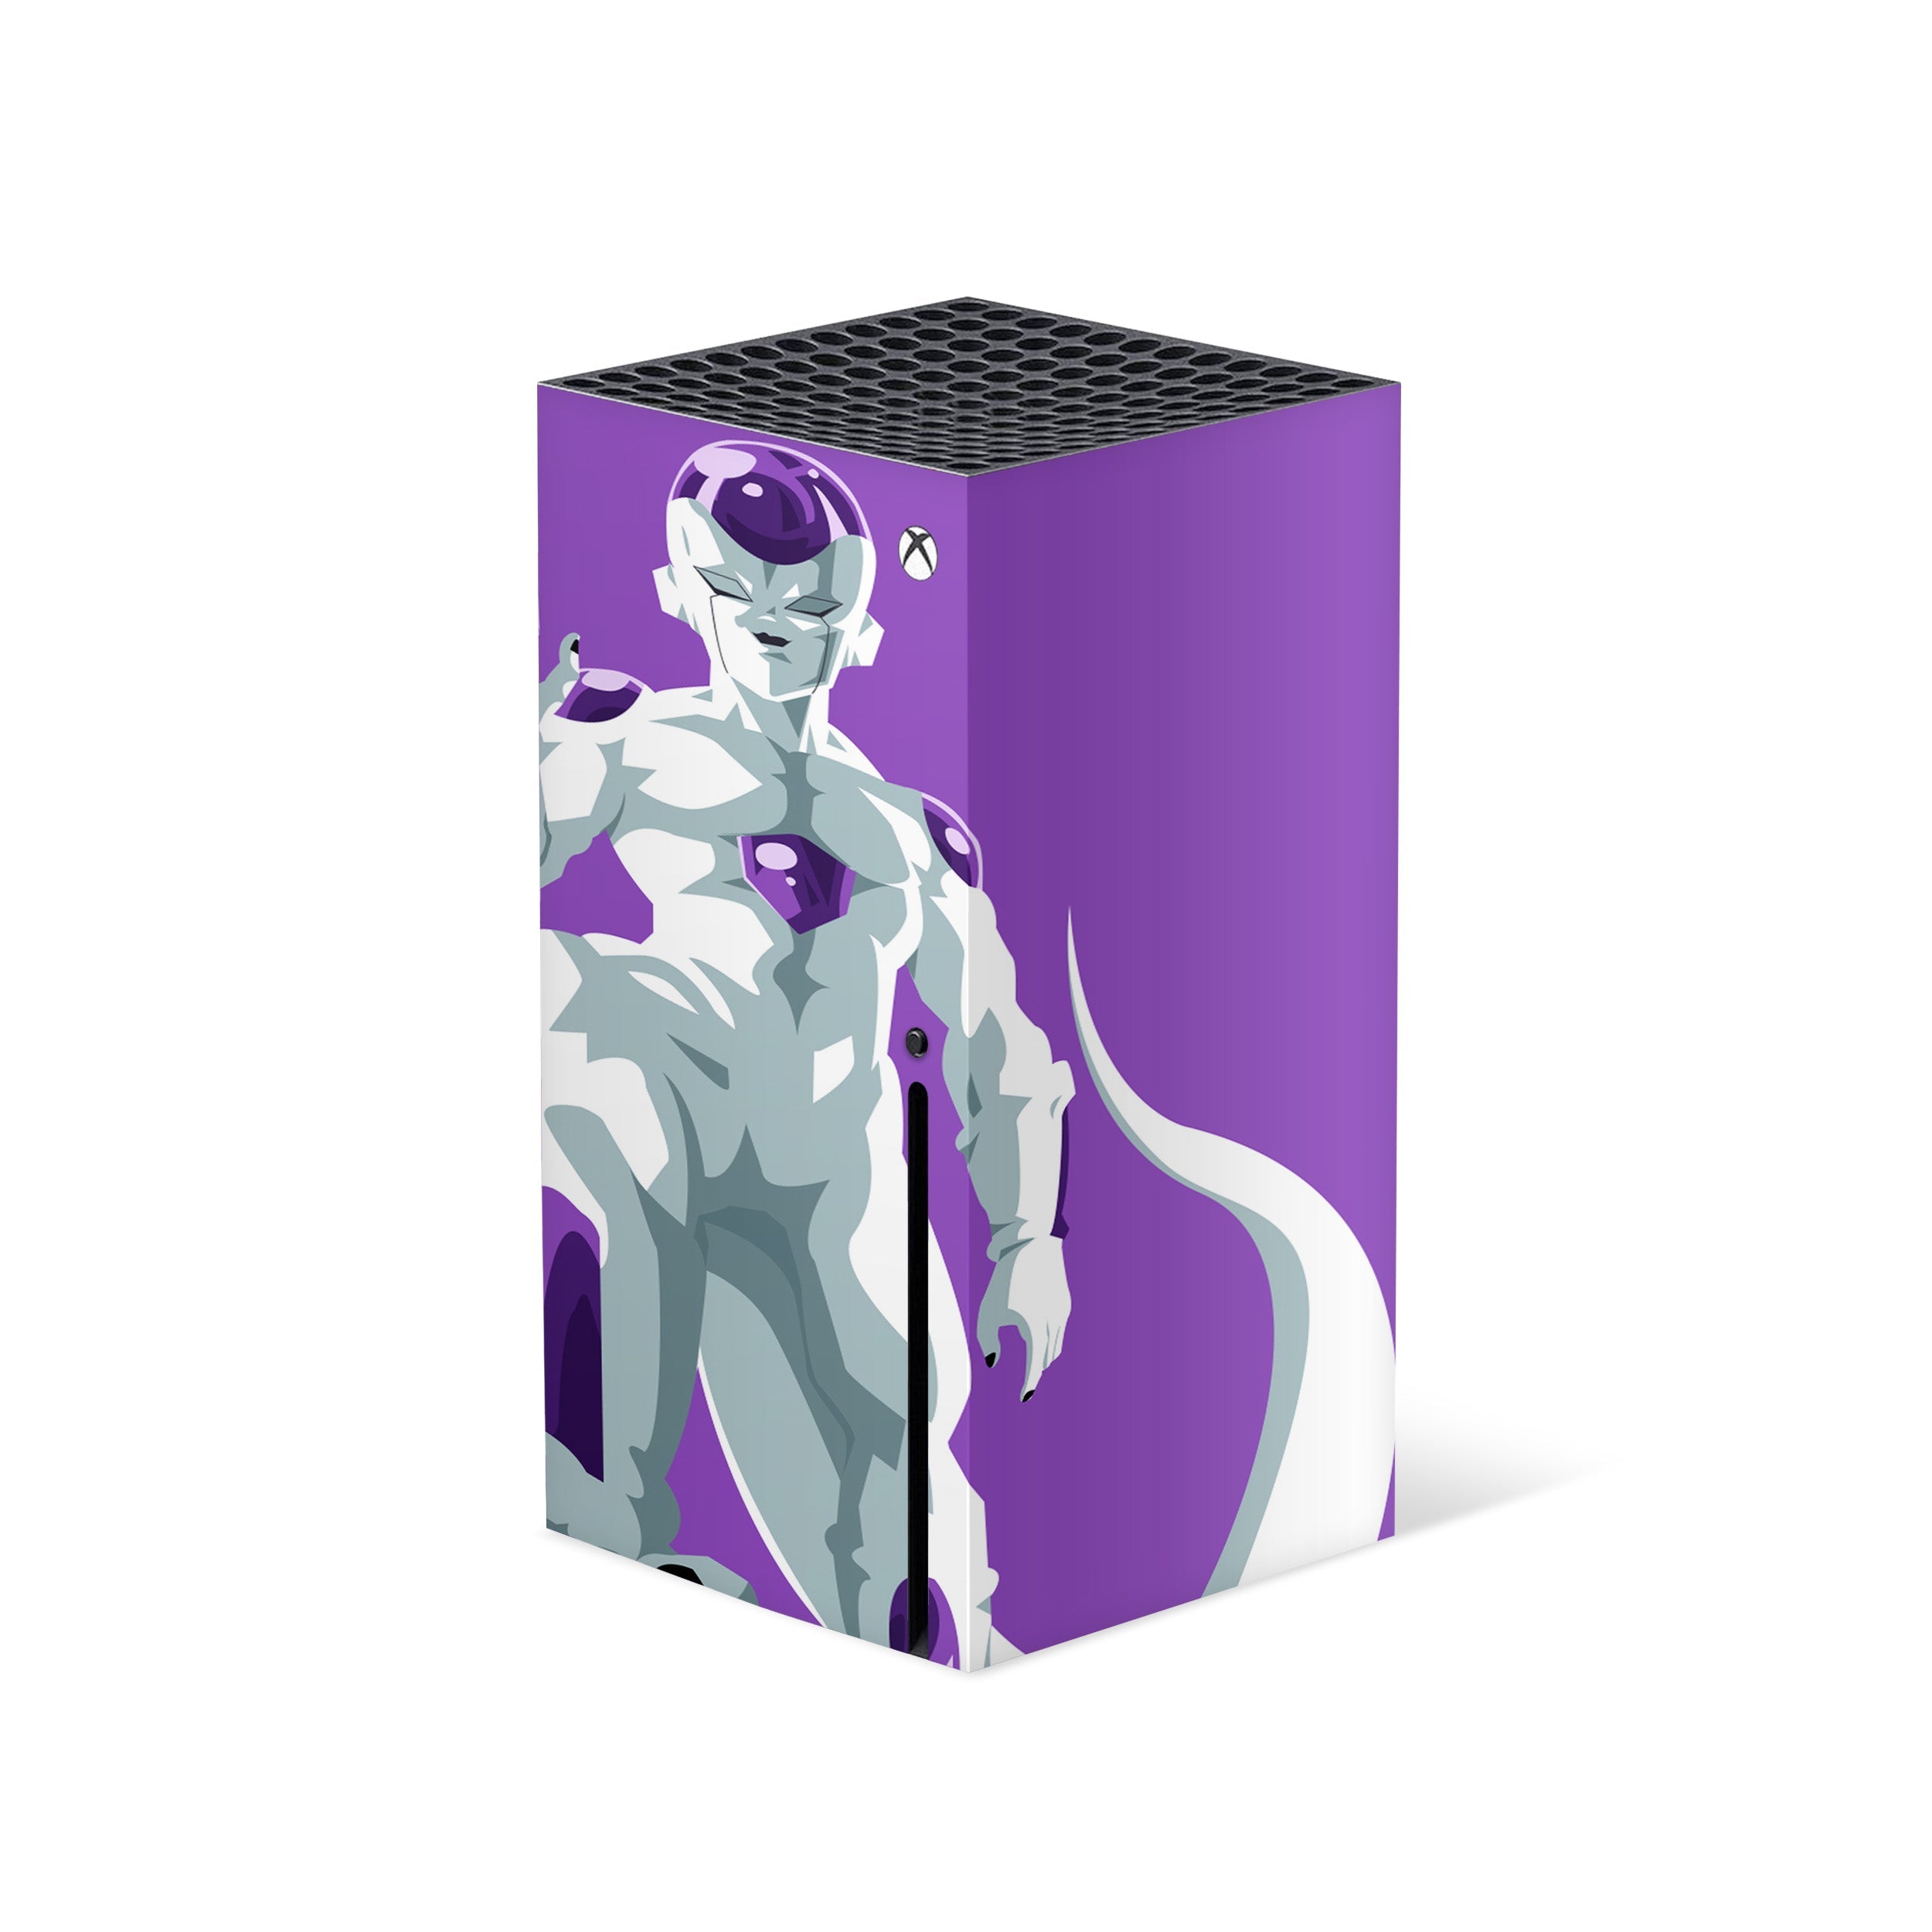 A video game skin featuring a Dragon Ball Z Frieza design for the Xbox Series X.